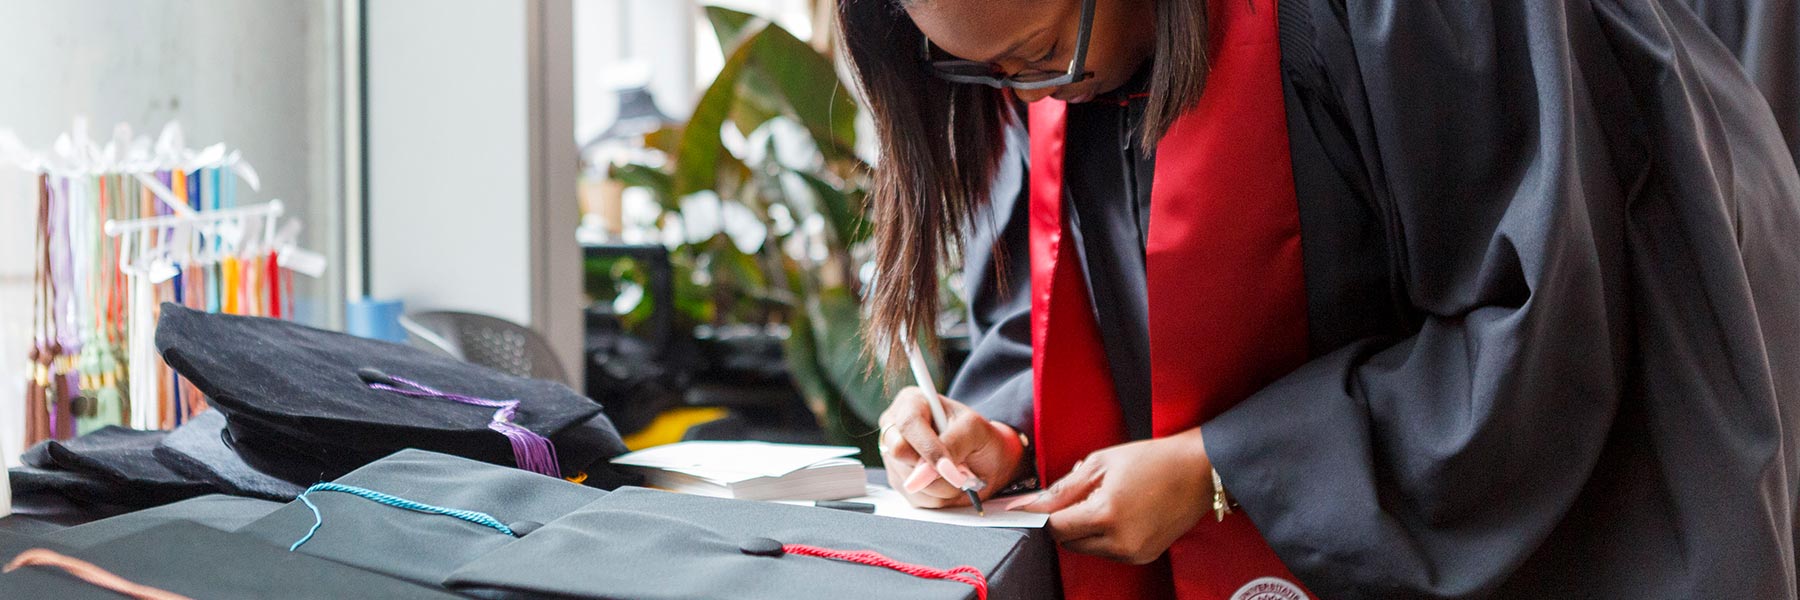 A graduate trying on a gown at GradFair leans down to write on a piece of paper at a table where tassels and caps are laid out.